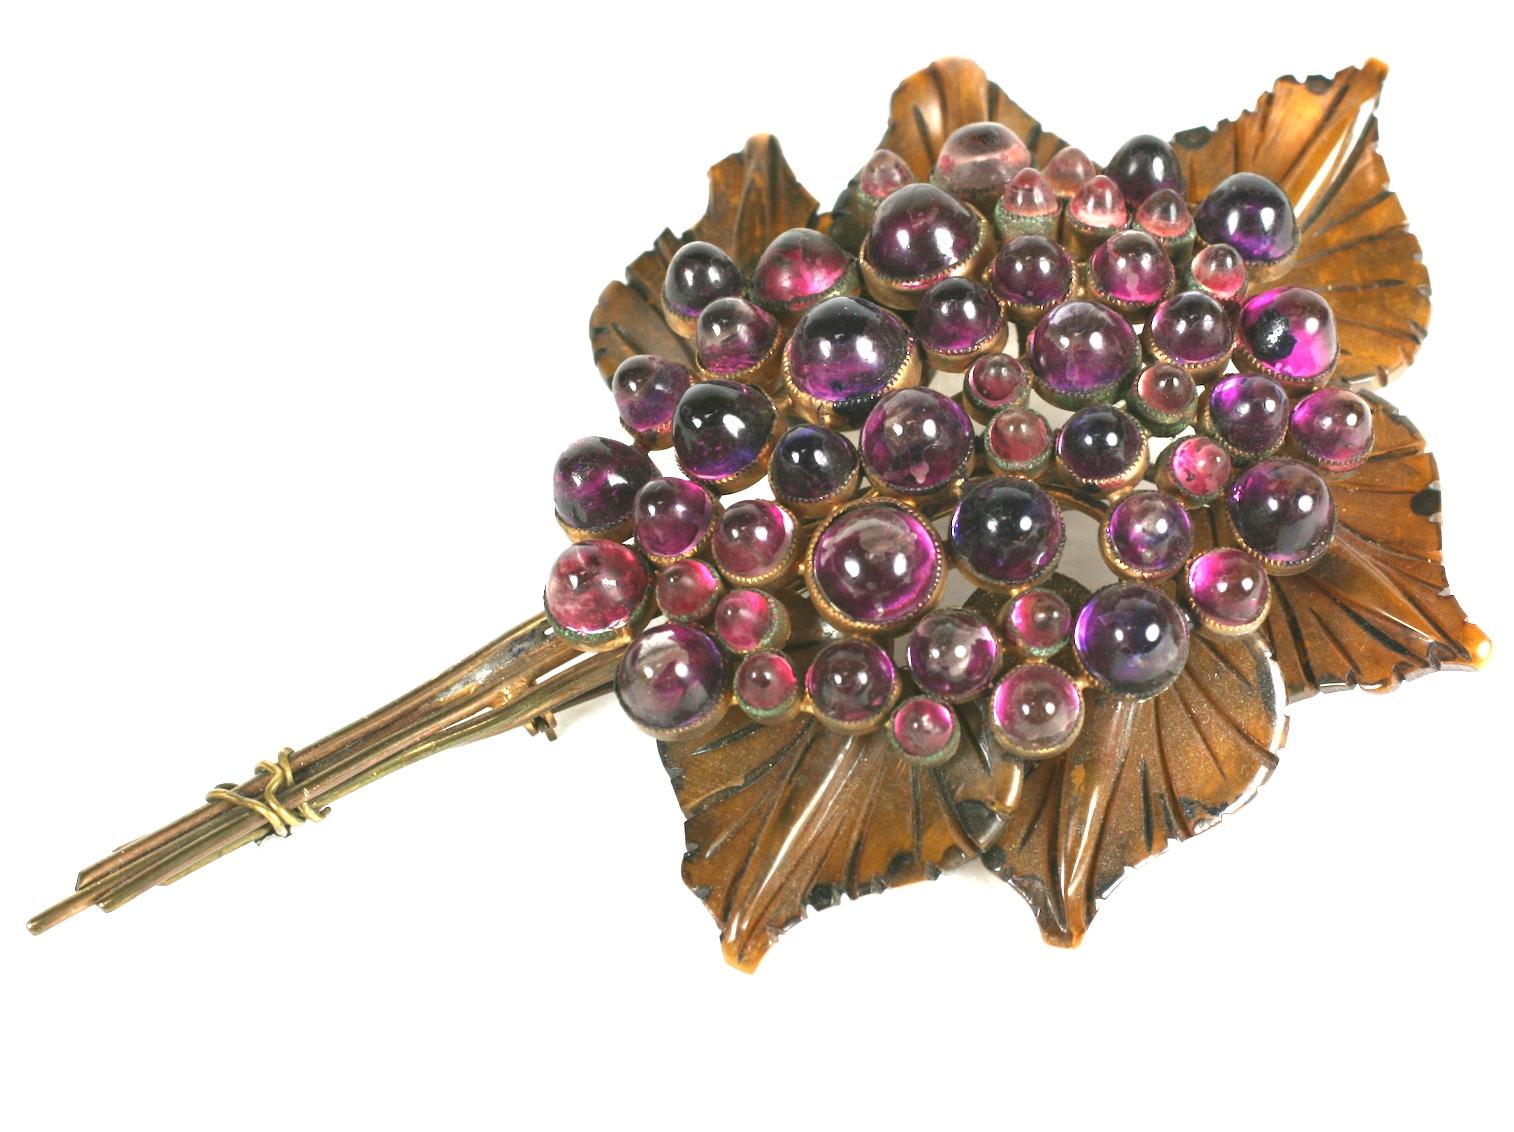 Masive Bakelite and lucite flower unsigned bouquet brooch by B. Blumenthal Co. from the mid 1930s. The brooch consists of olive  green colored hand carved bakelite leaves with amythest glass bezel set bullet cabochons with gilt brass stems wrapped